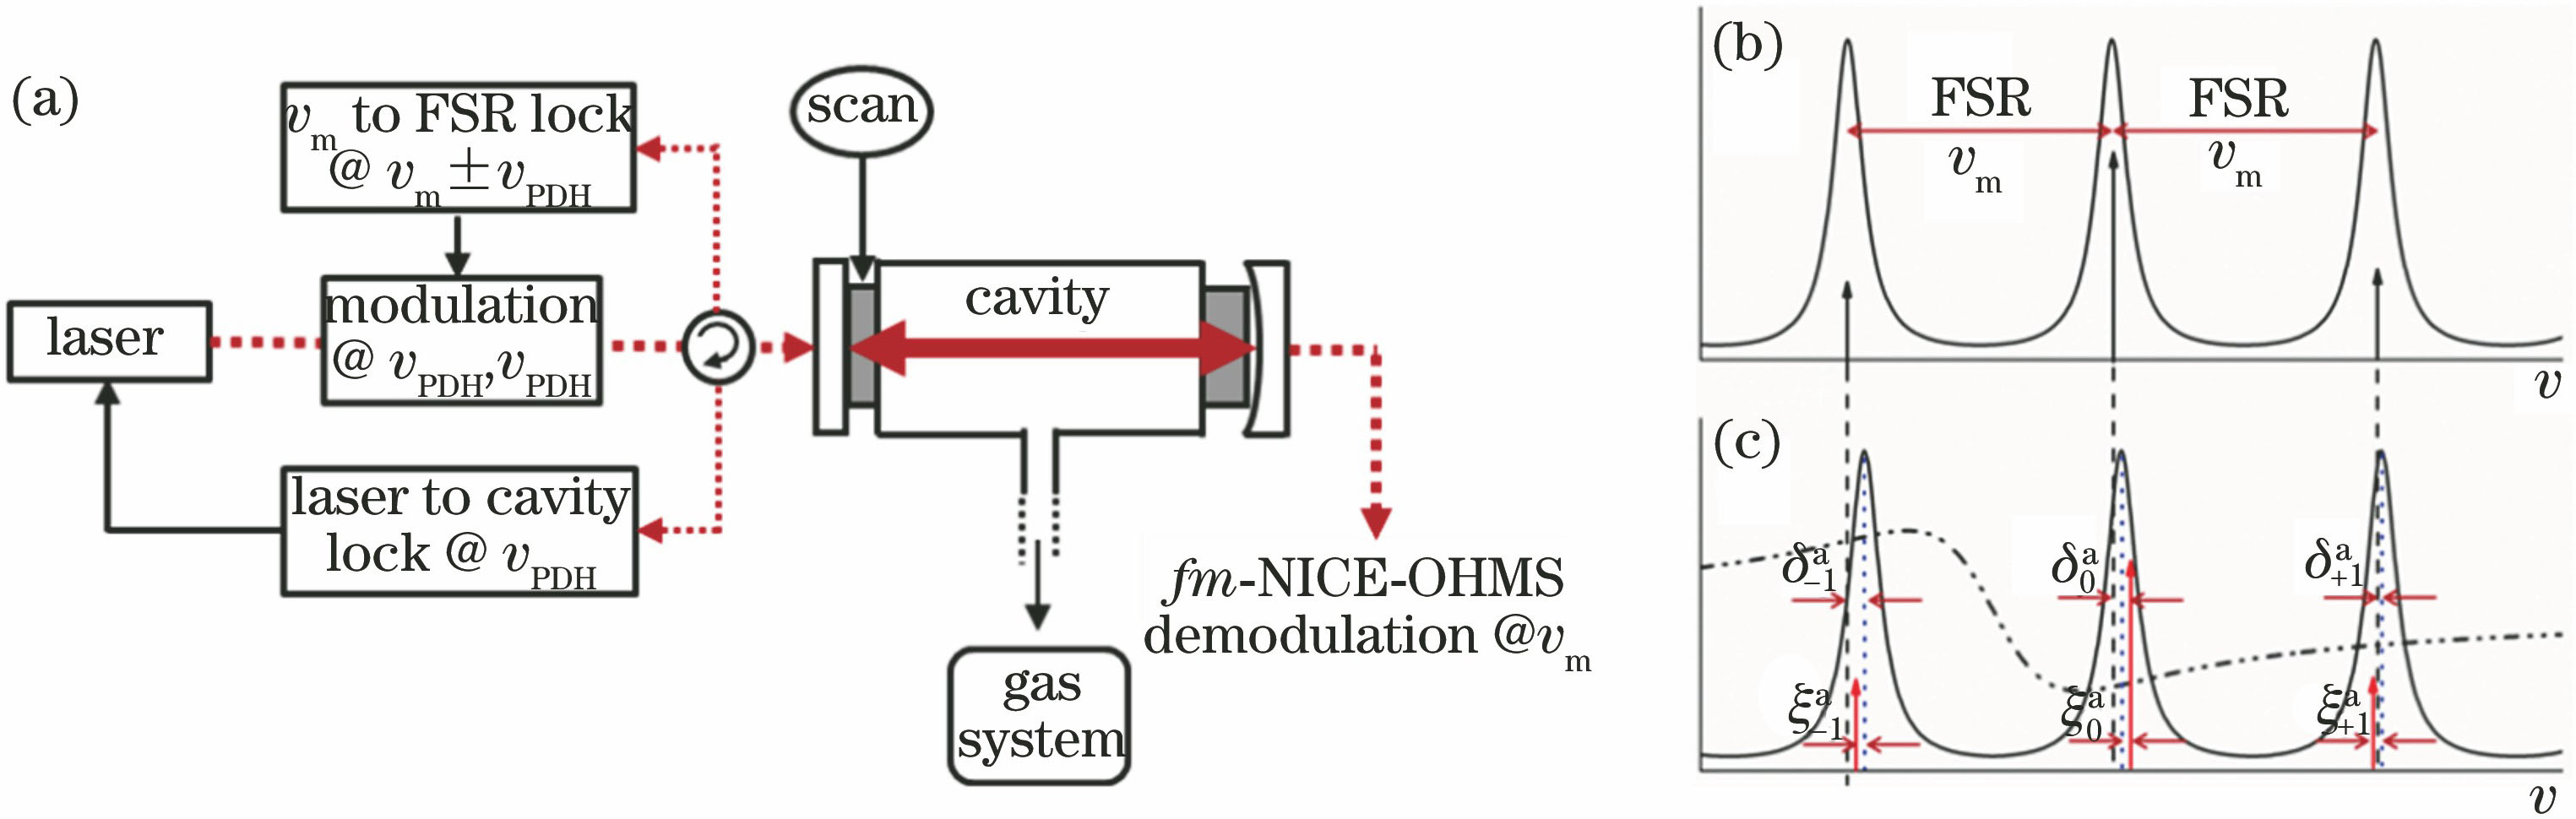 (a) Principle of NICE-OHMS; relationship of laser components and cavity modes when cavity is (b) empty or (c) filled with targeted gas